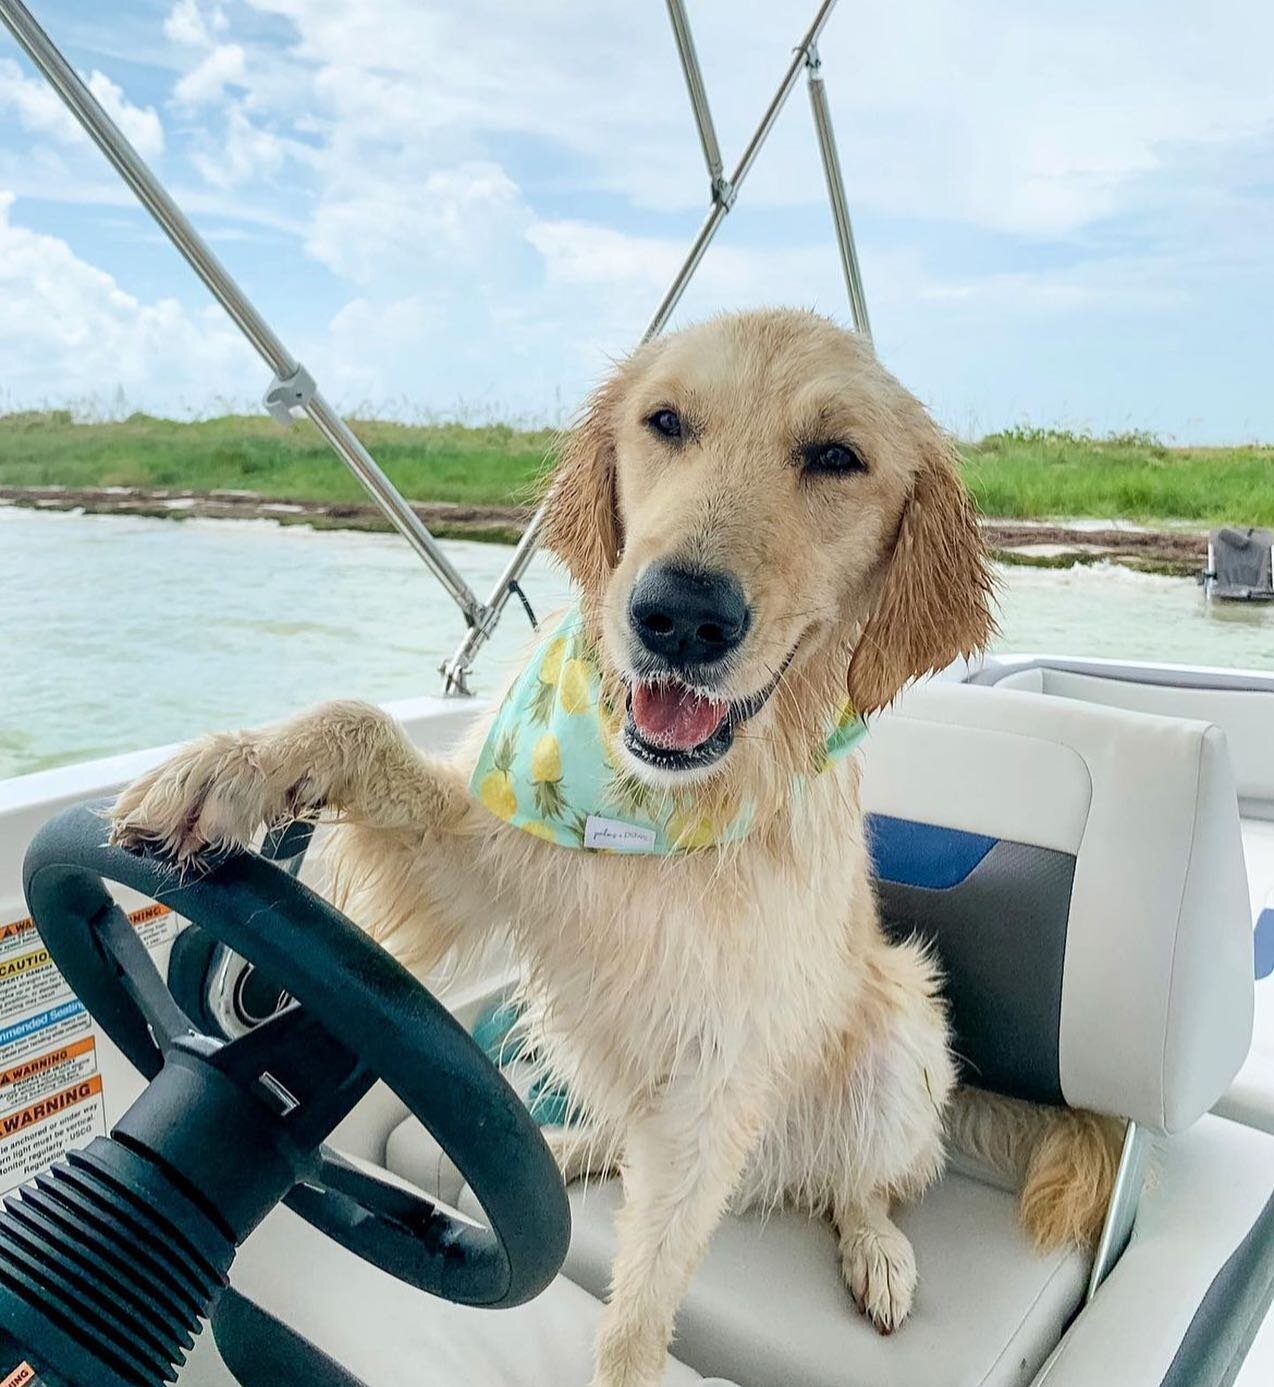 Everyday is boat day in the summer 🐶 🚤 🌞